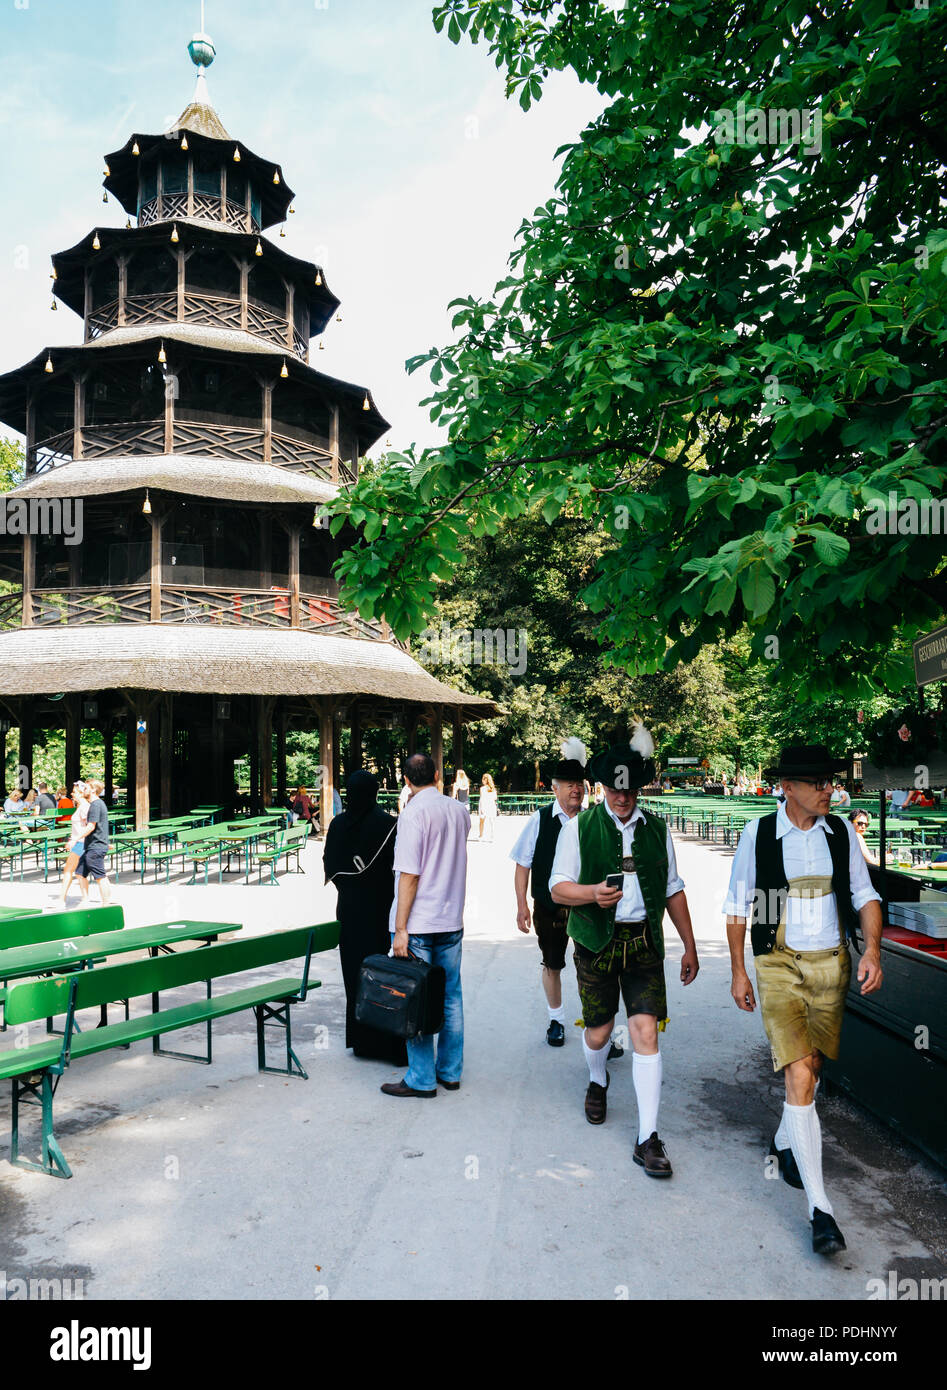 Munich, Germany - July 29, 2018: Traditionally dressed Bavarian men next to the Chinese Tower in English gardens . Muslim woman in full black veil Stock Photo